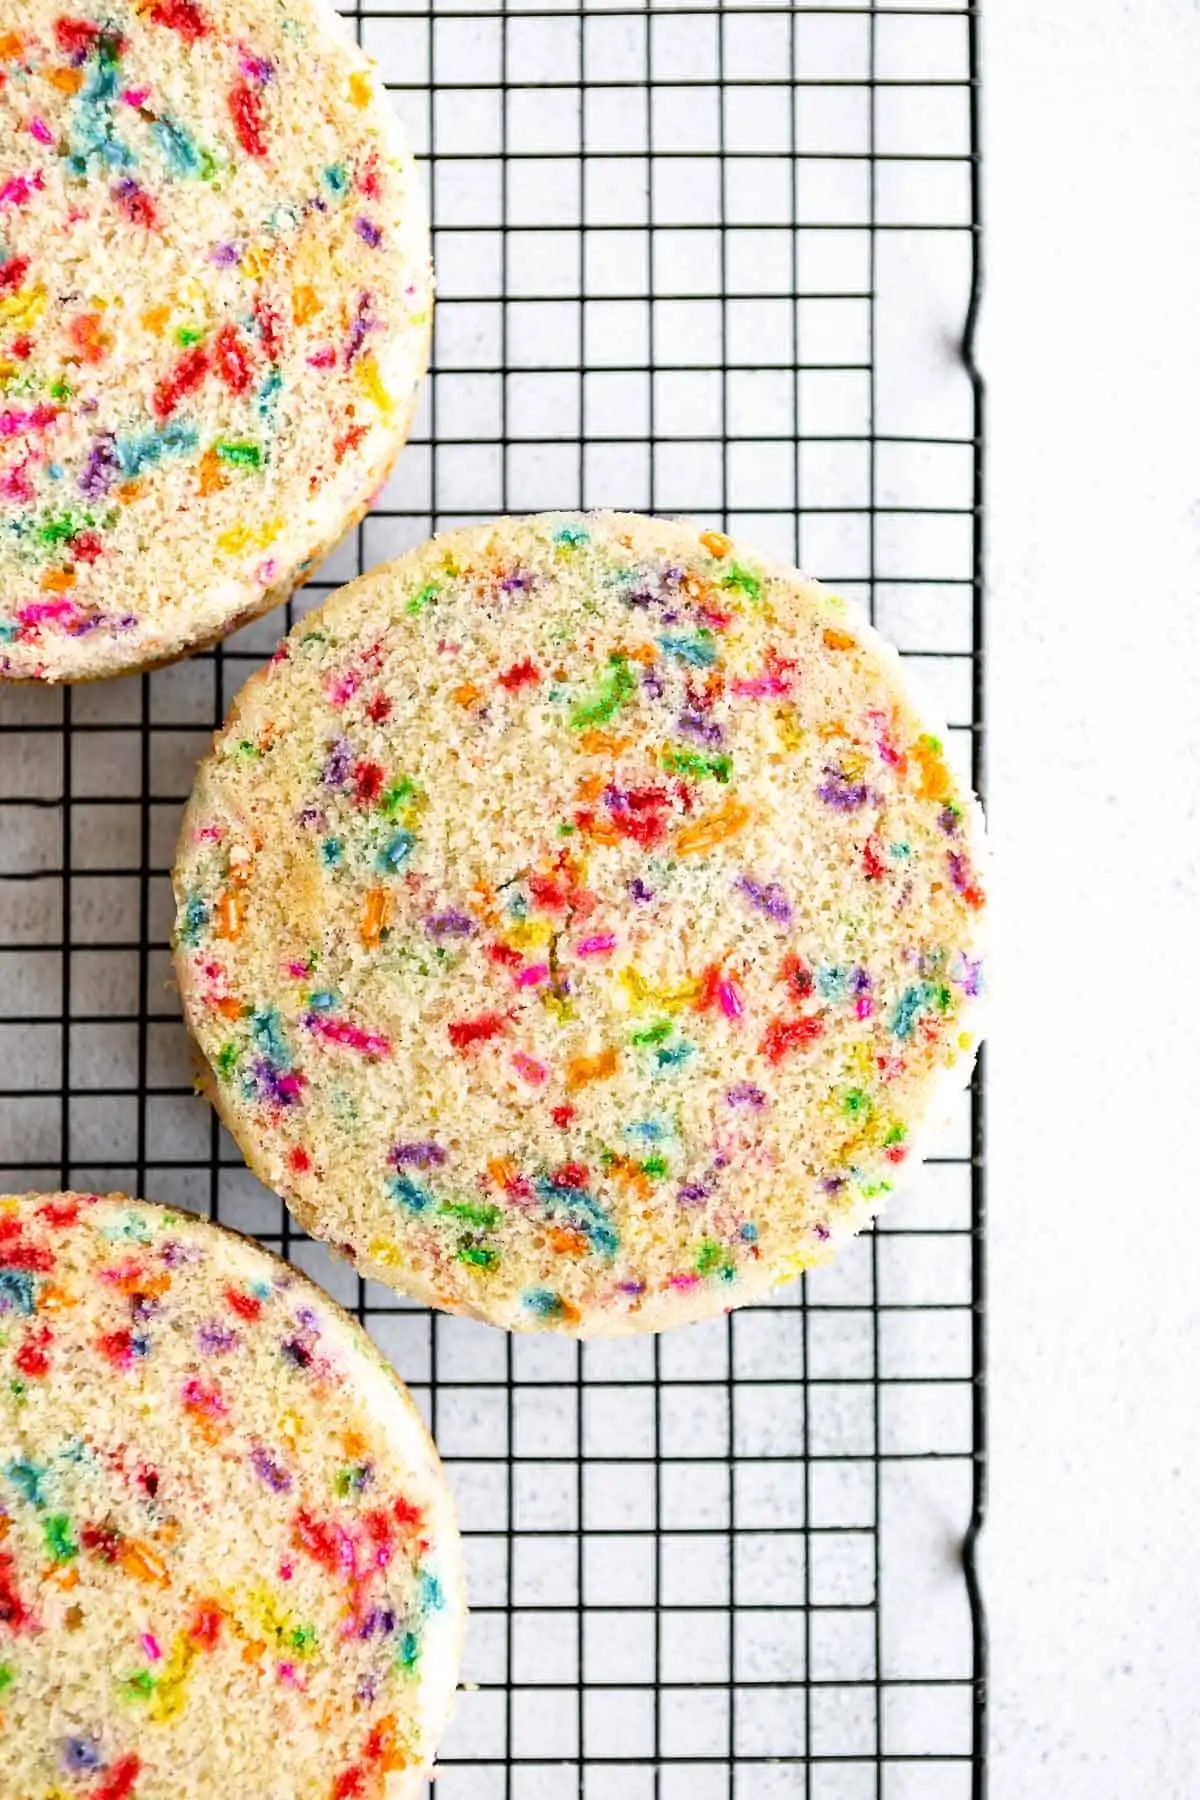 funfetti cake on a cooling rack after baking